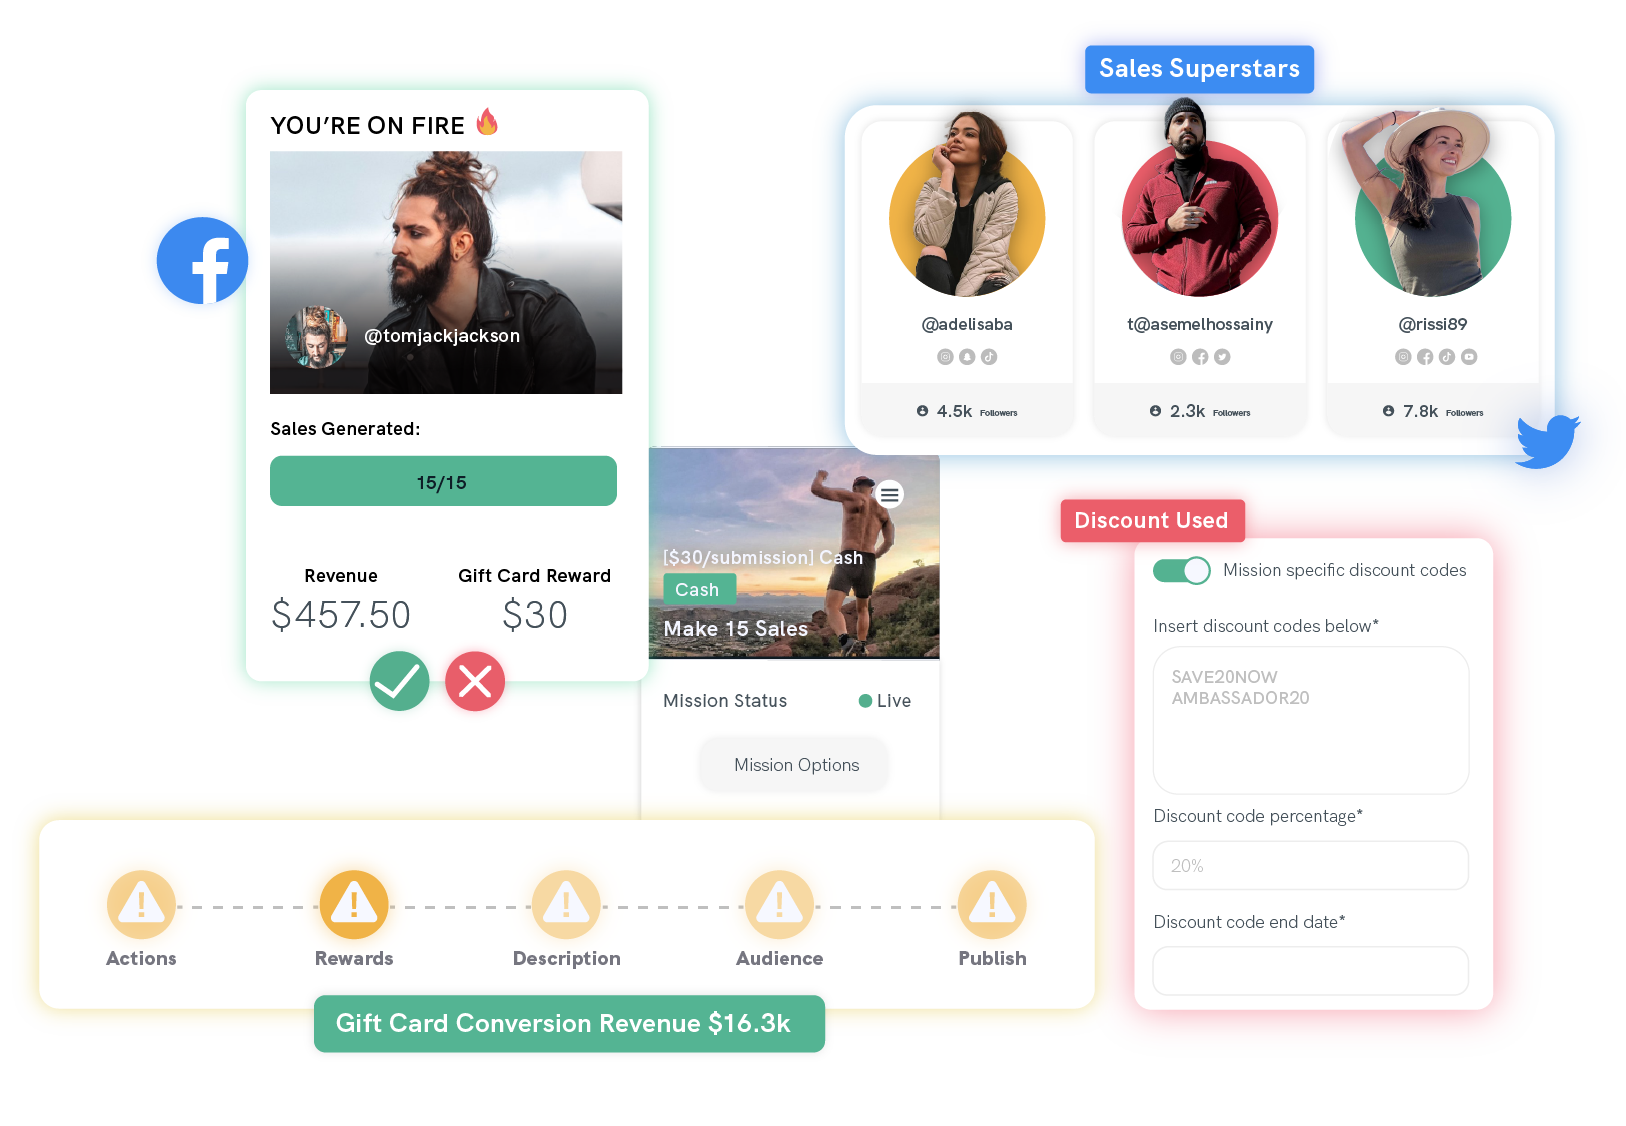 Reward dynamically with engagement-based reward structures. Incentivise engagement such as likes, comments, shares, and more and recognise high-performing ambassadors to increase revenue..